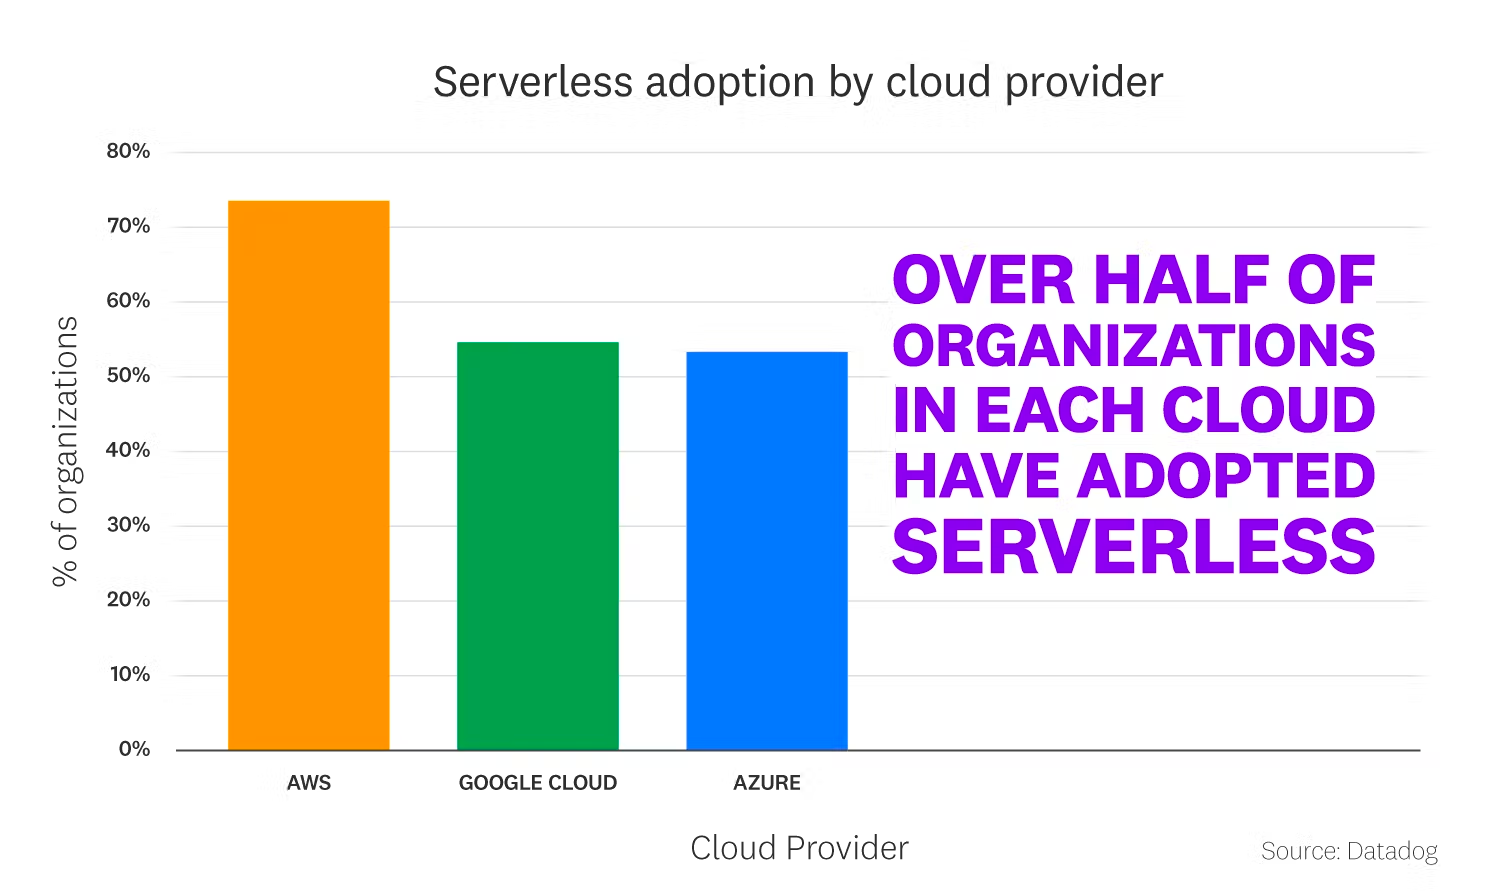 Over half of organizations operating in each cloud have adopted serverless